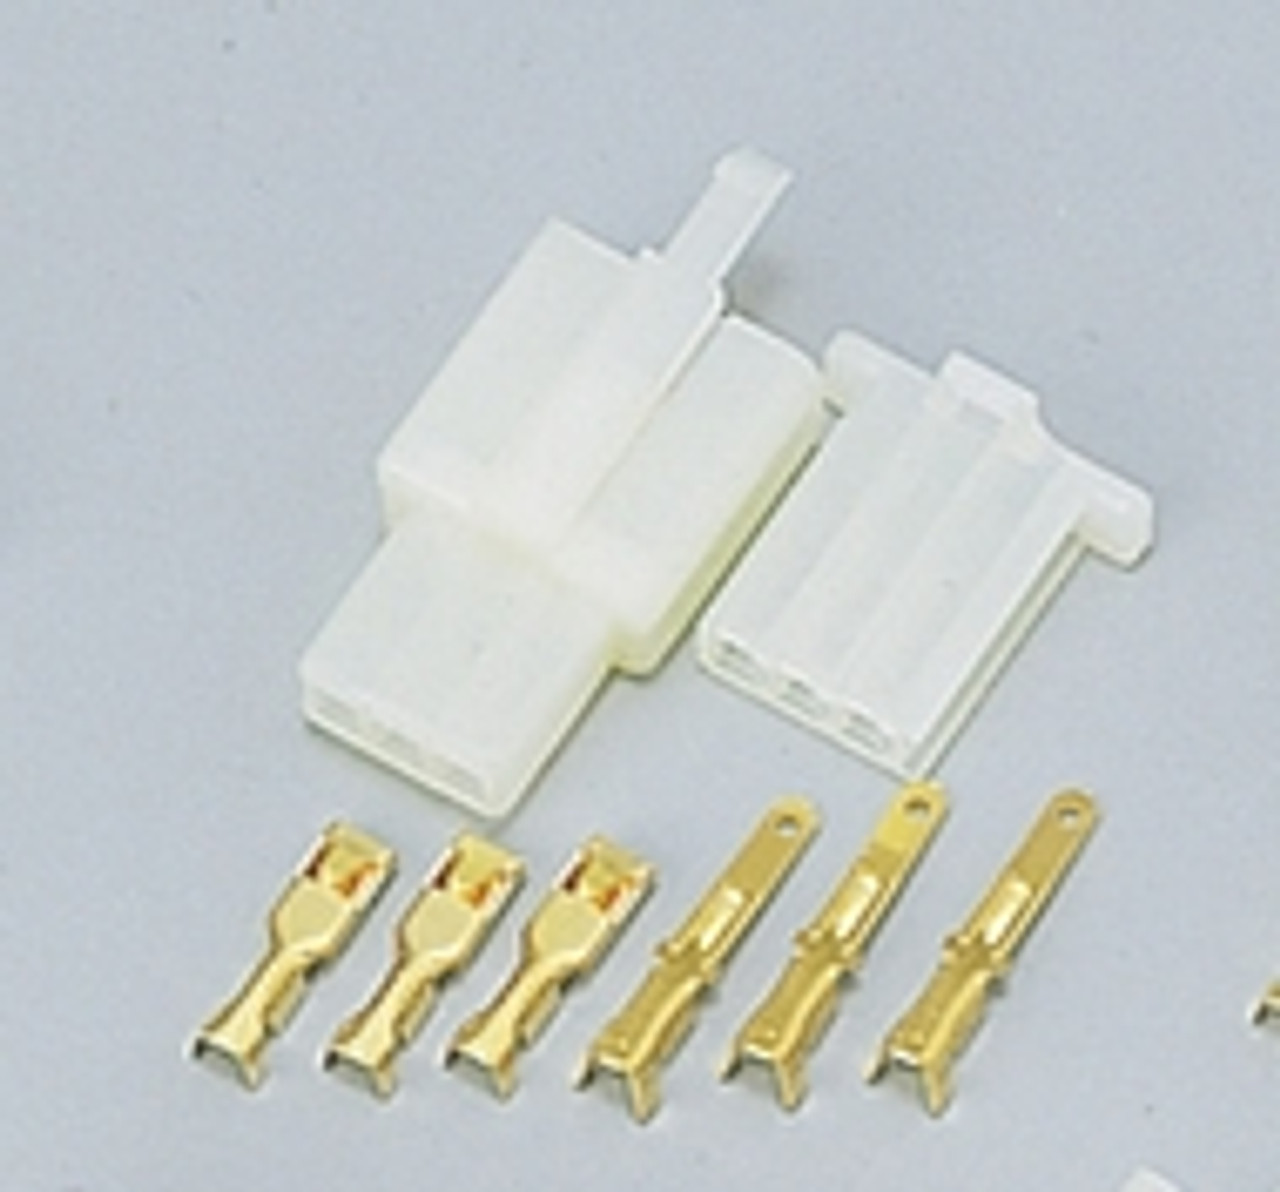 3-Wire Connector Set 110/250 Type, 3 Poles